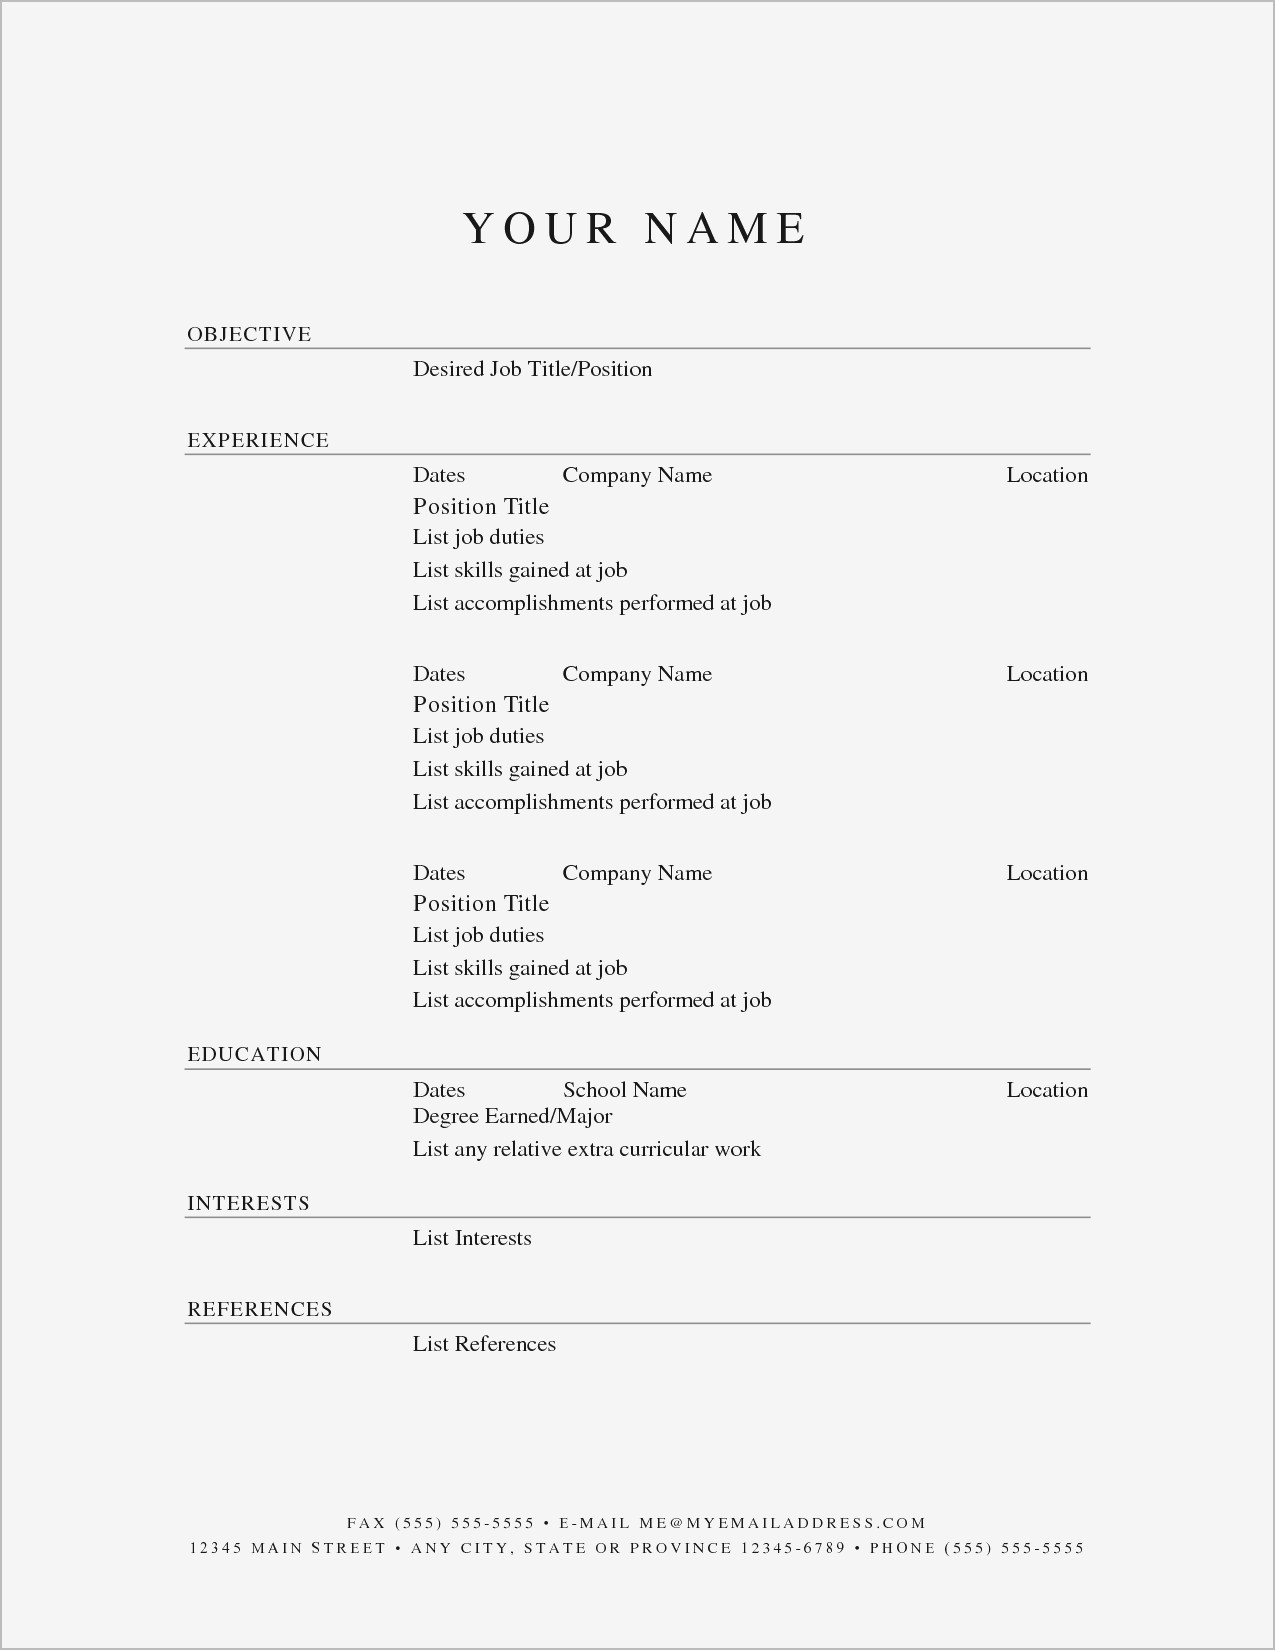 Template Ideas Resume For High School Students Fill In The Blank with Free Bio Template Fill In Blank